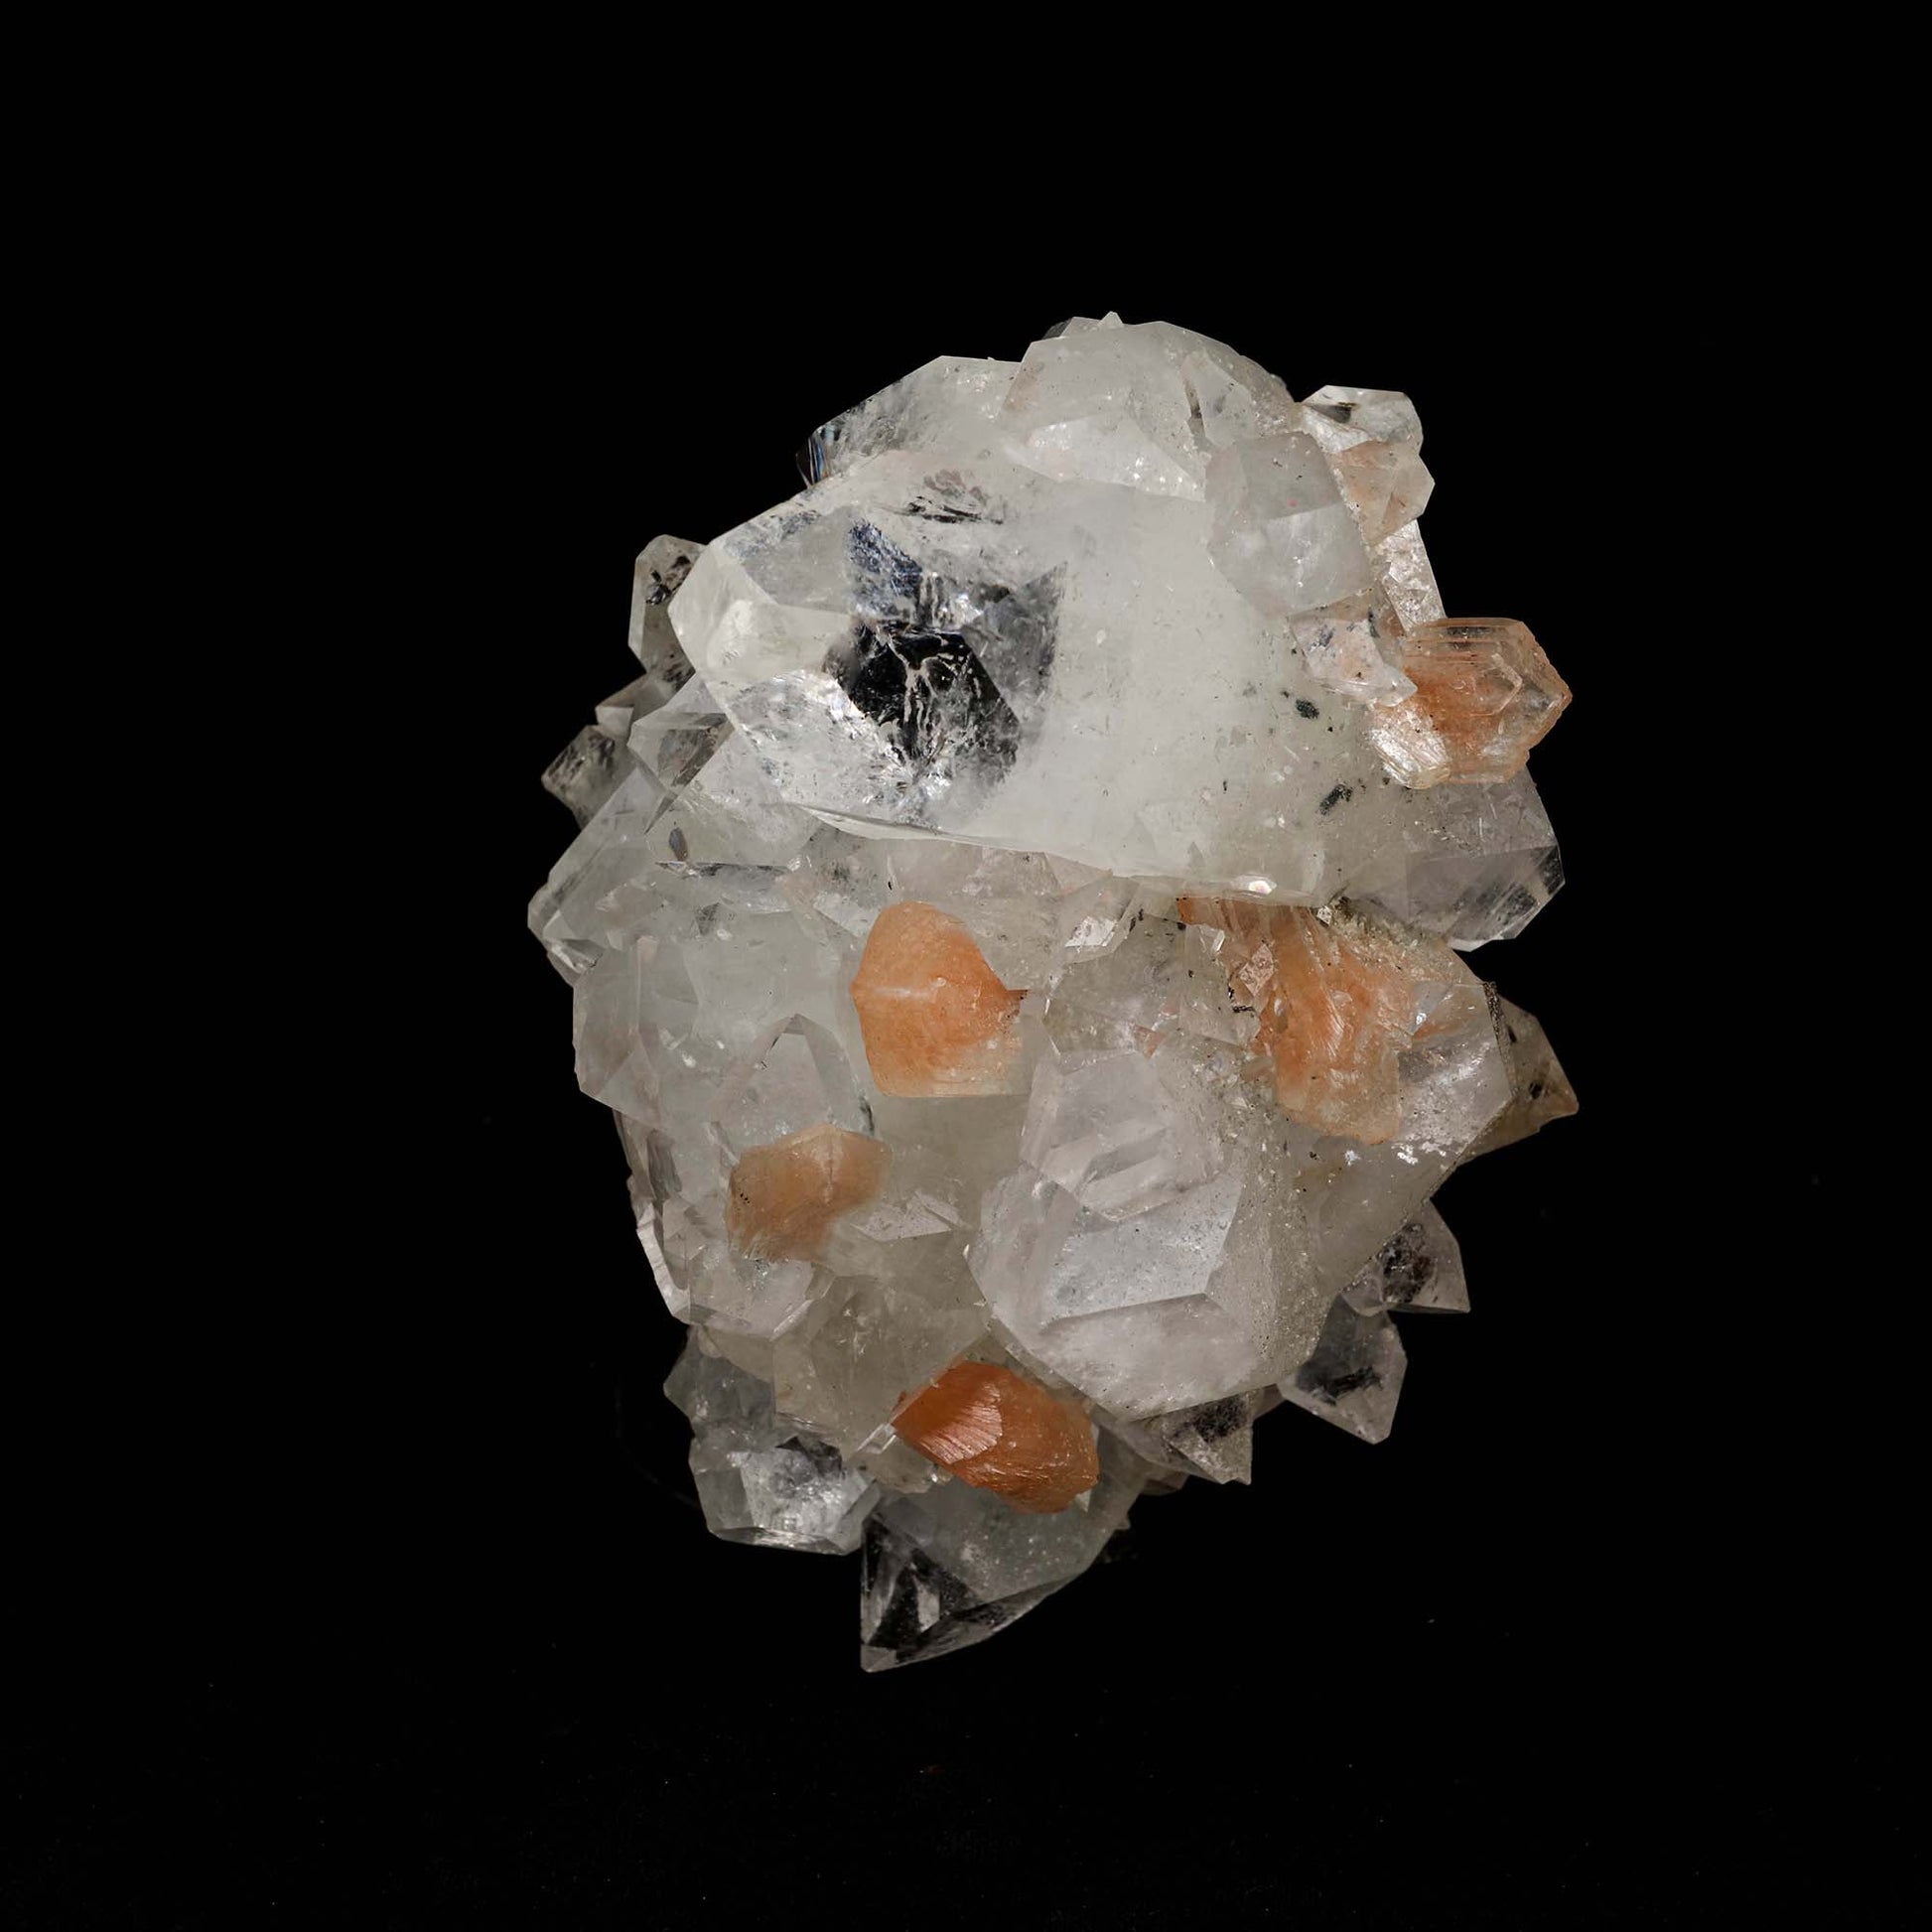 Apophyllite Sprakling with Stilbite Natural Mineral Specimen # B 5193  https://www.superbminerals.us/products/apophyllite-sprakling-with-stilbite-natural-mineral-specimen-b-5193  Features: Beautiful specimen of gem clear Fluorapophyllite crystals with Stilbite from Jalgaon District, Maharashtra, India. The specimen consists of striking, strongly lustrous, transparent and gem, Fluorapophyllite crystals growing in a sculptural shape. The quality of the Fluorapophyllite is very good - transparent